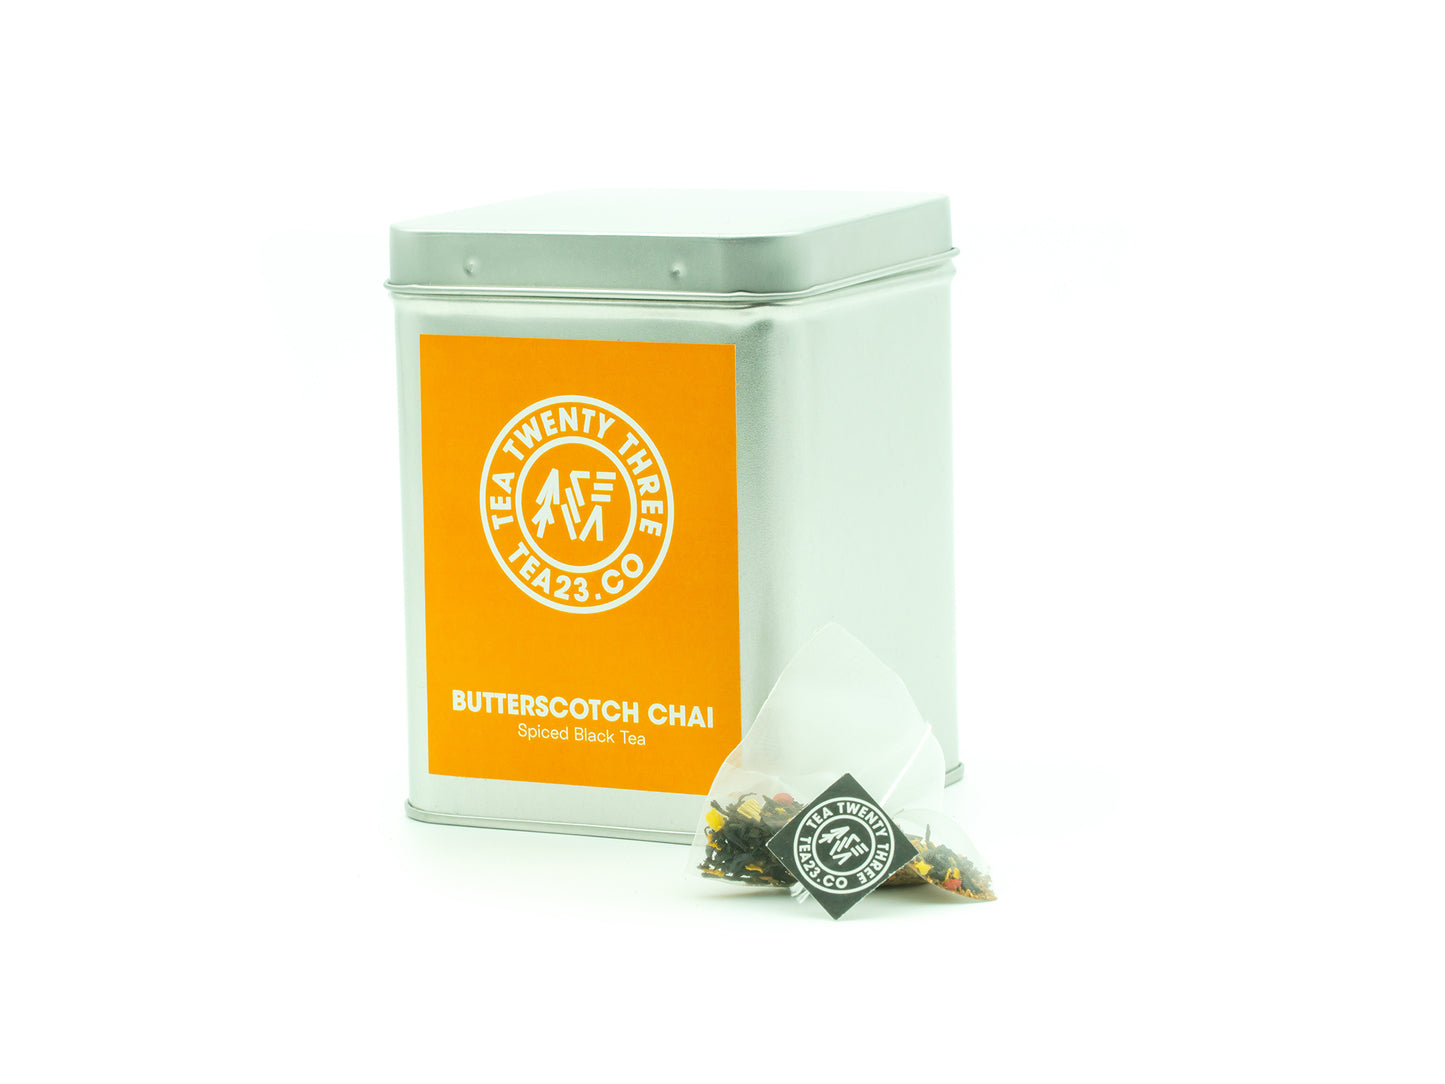 An Aromatic Chai tea bag from TEA23 sits in front of a tea caddy from Tea23